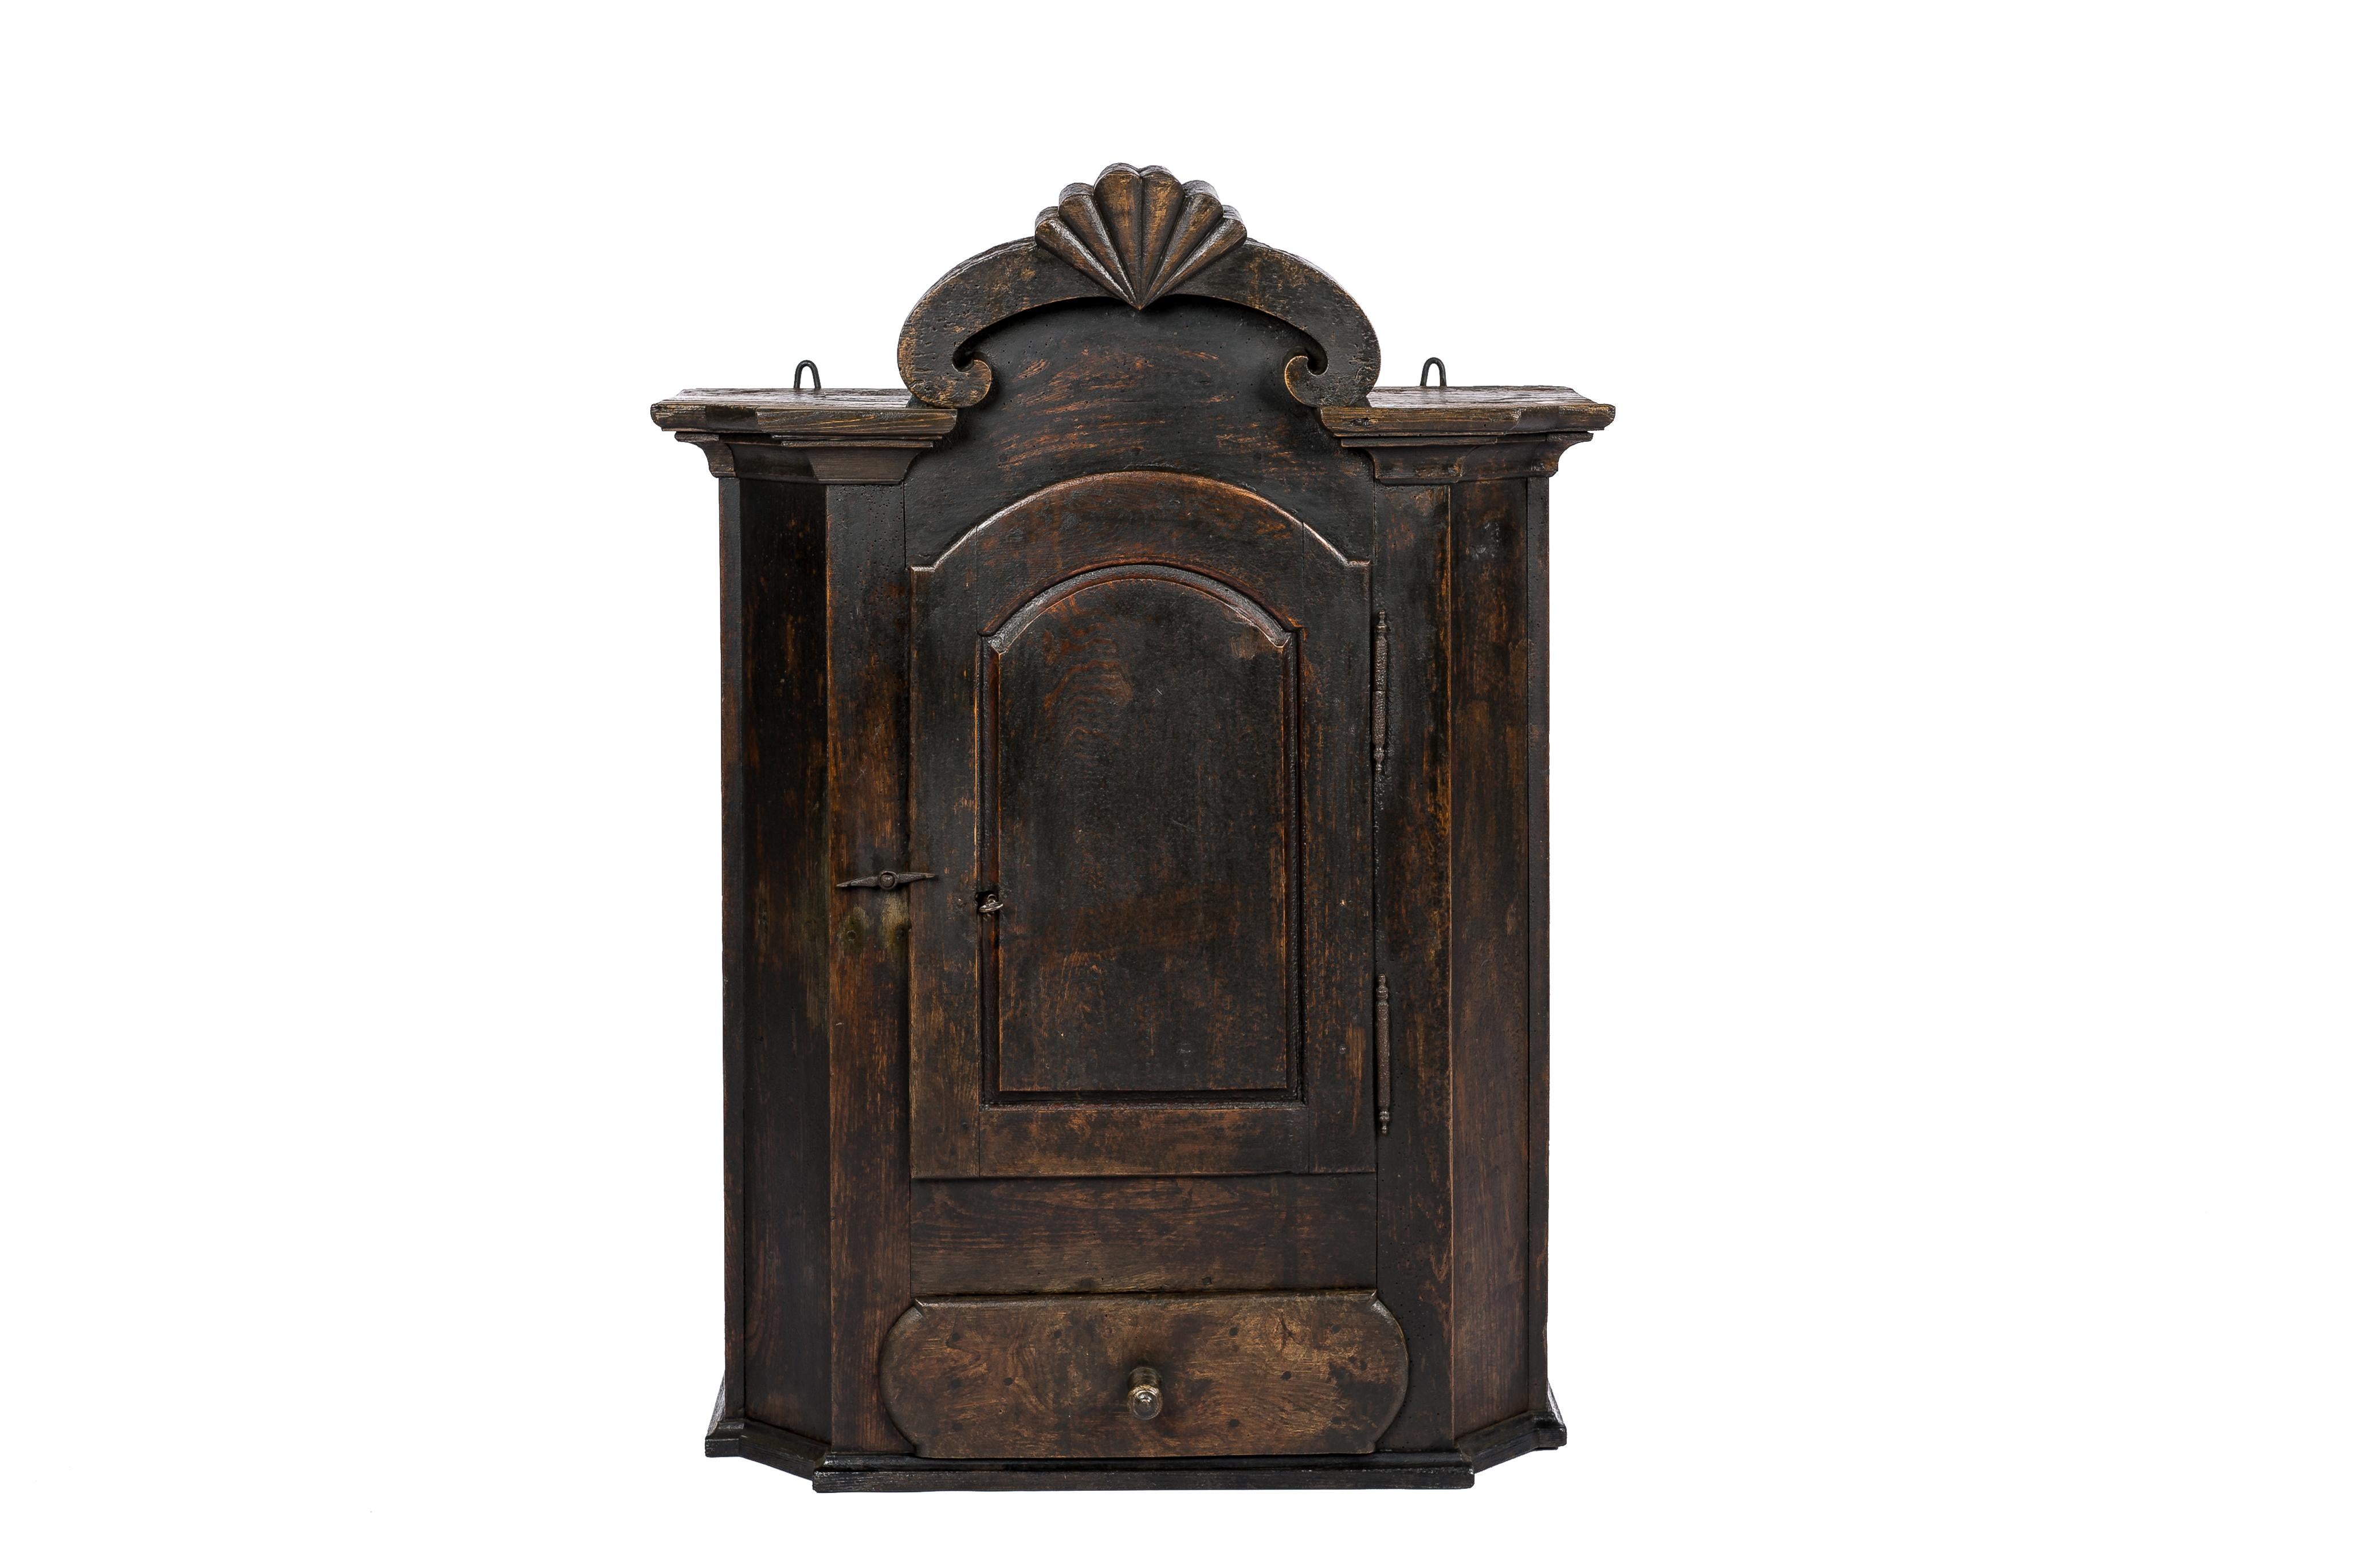 This very rare and exceptional antique baroque hanging cupboard was made in central Germany in the early 18th century circa 1720. It was made from solid oak and pine and was painted in a very dark brown color. This elegant cupboard features slanted